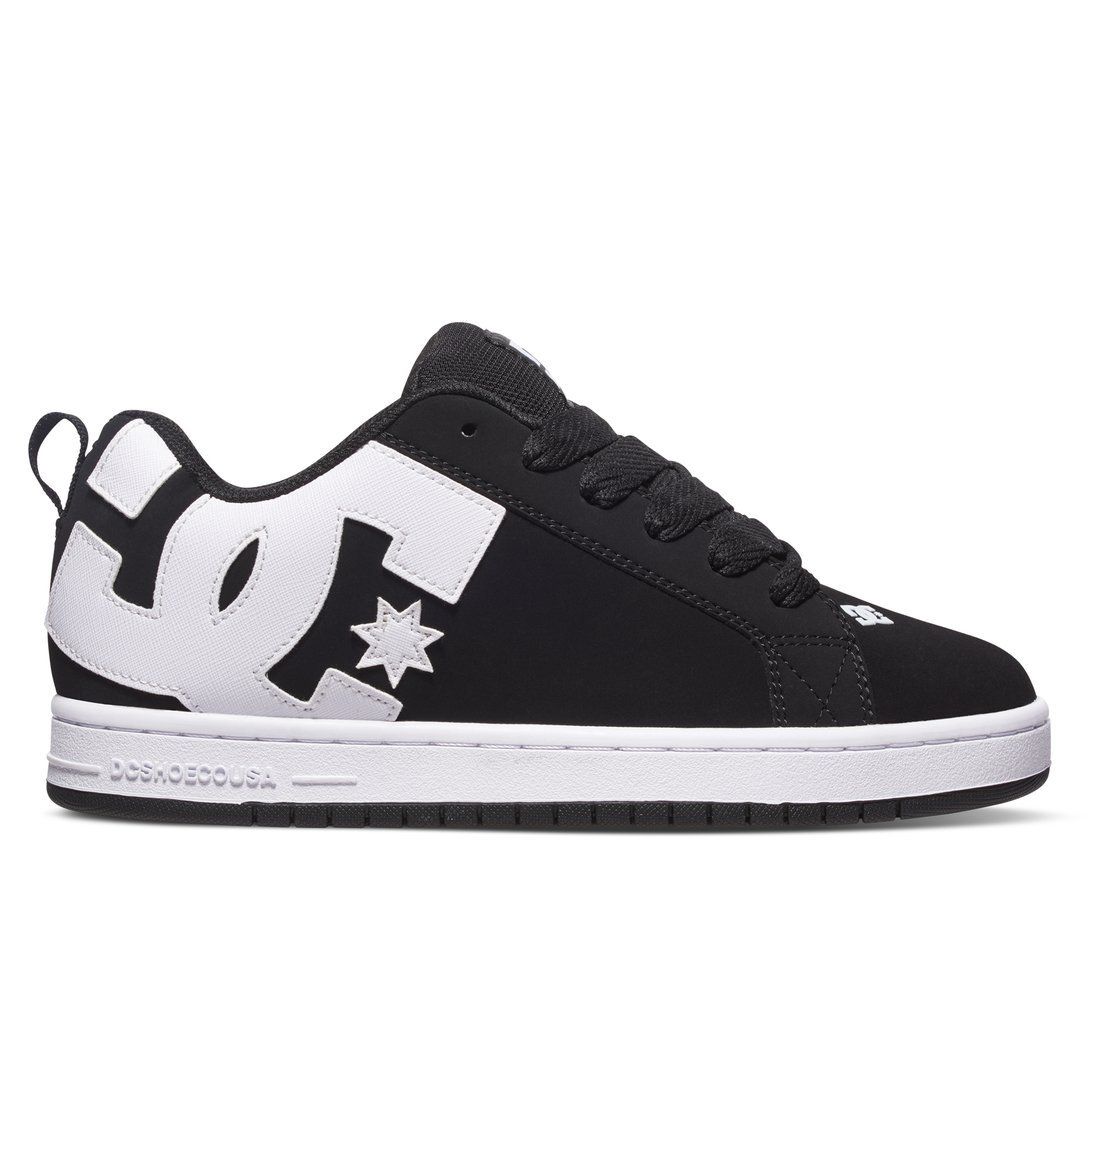 DC Men's Court Graffik Skate Shoe *** Check this awesome product by going  to the link at the image. (This is an Amaz… | Männerschuhe, Skateschuhe,  Schuhe für männer